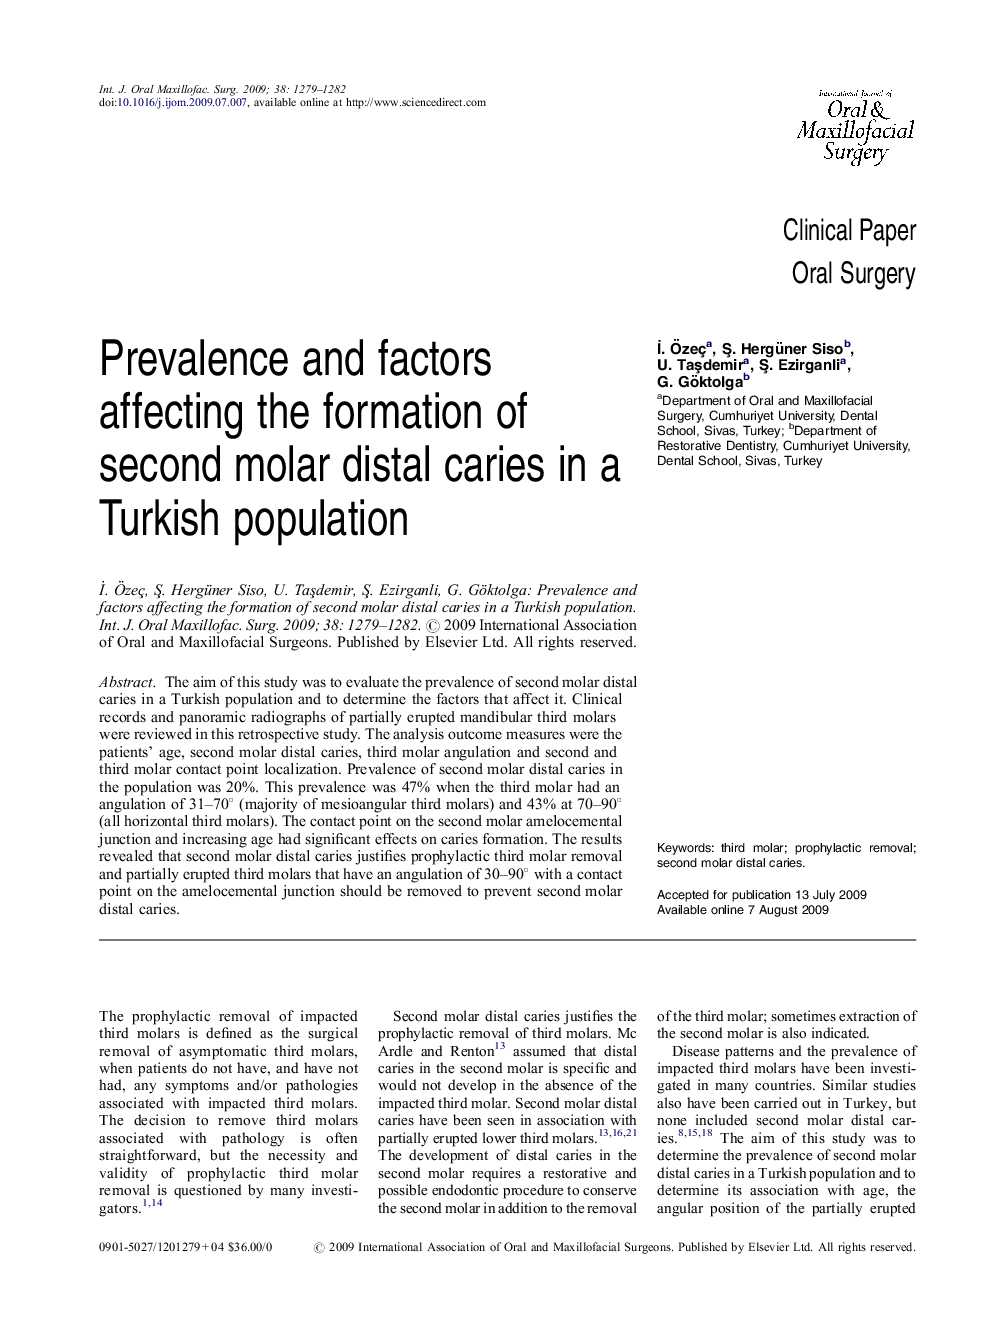 Prevalence and factors affecting the formation of second molar distal caries in a Turkish population